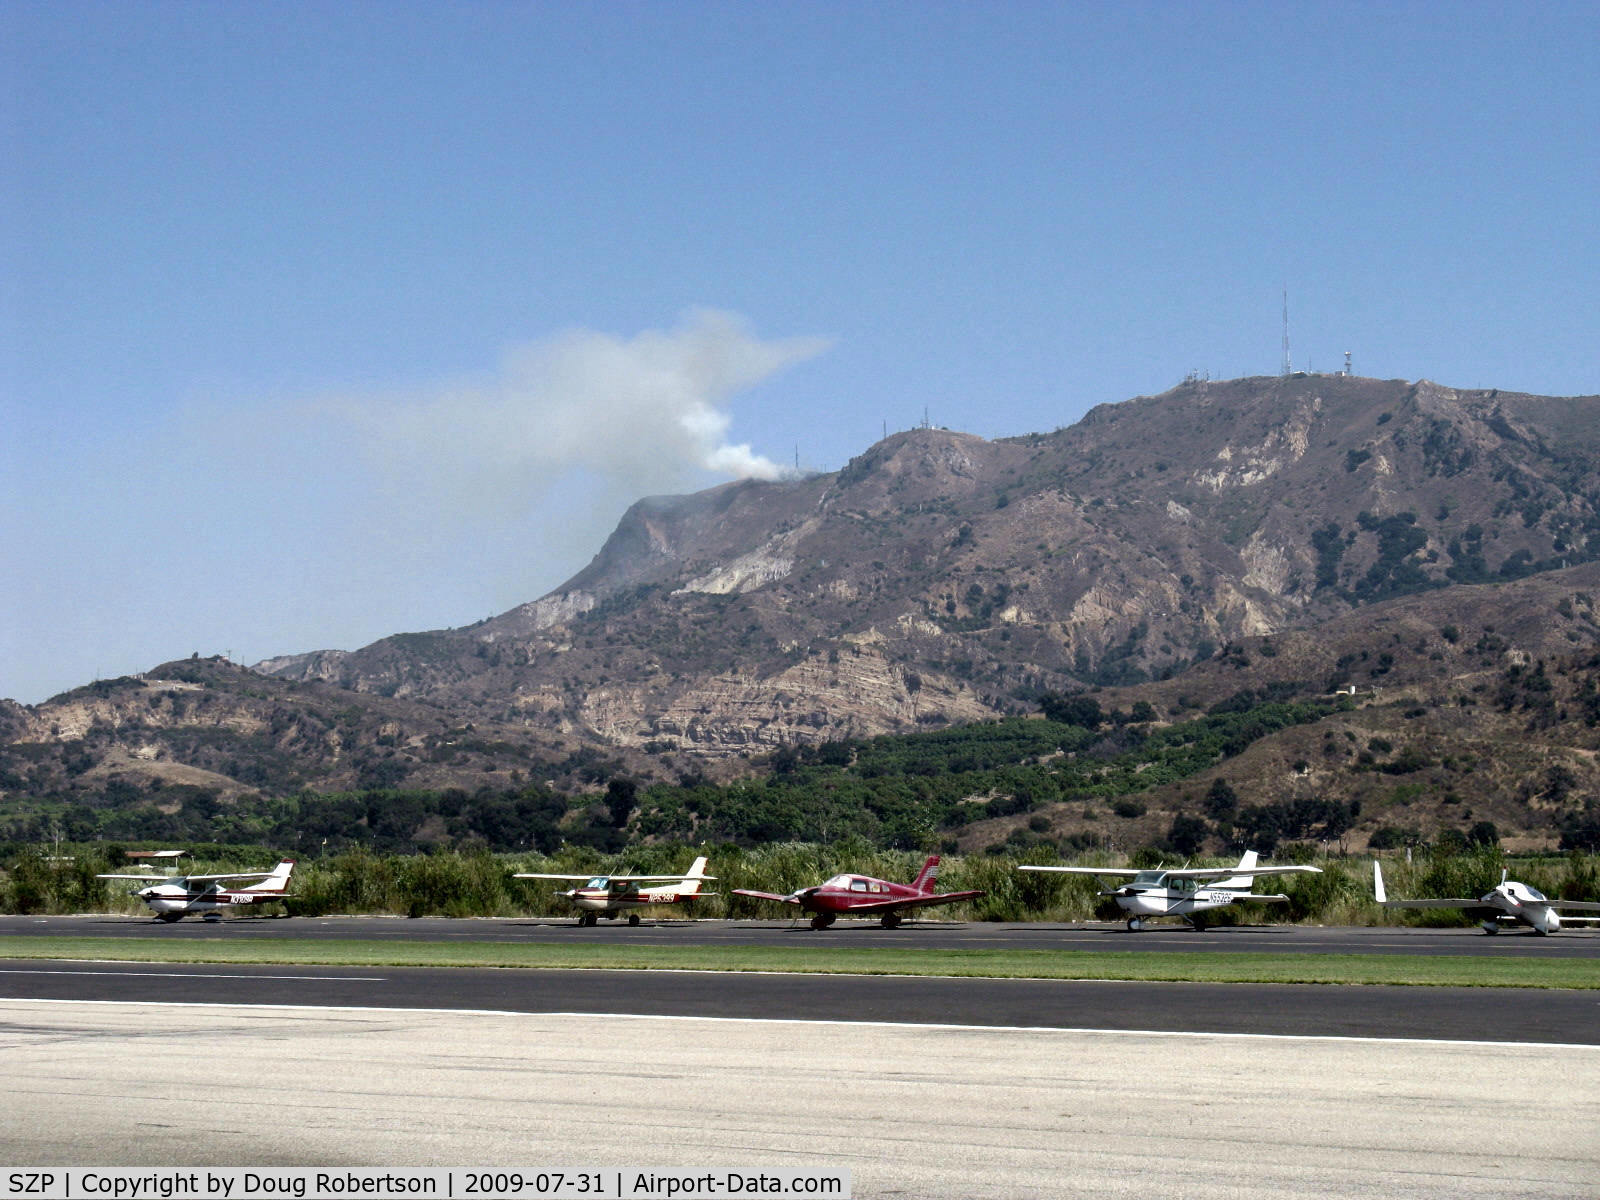 Santa Paula Airport (SZP) - Photo 2. South Mountain new fire just noted. Fire Department called.